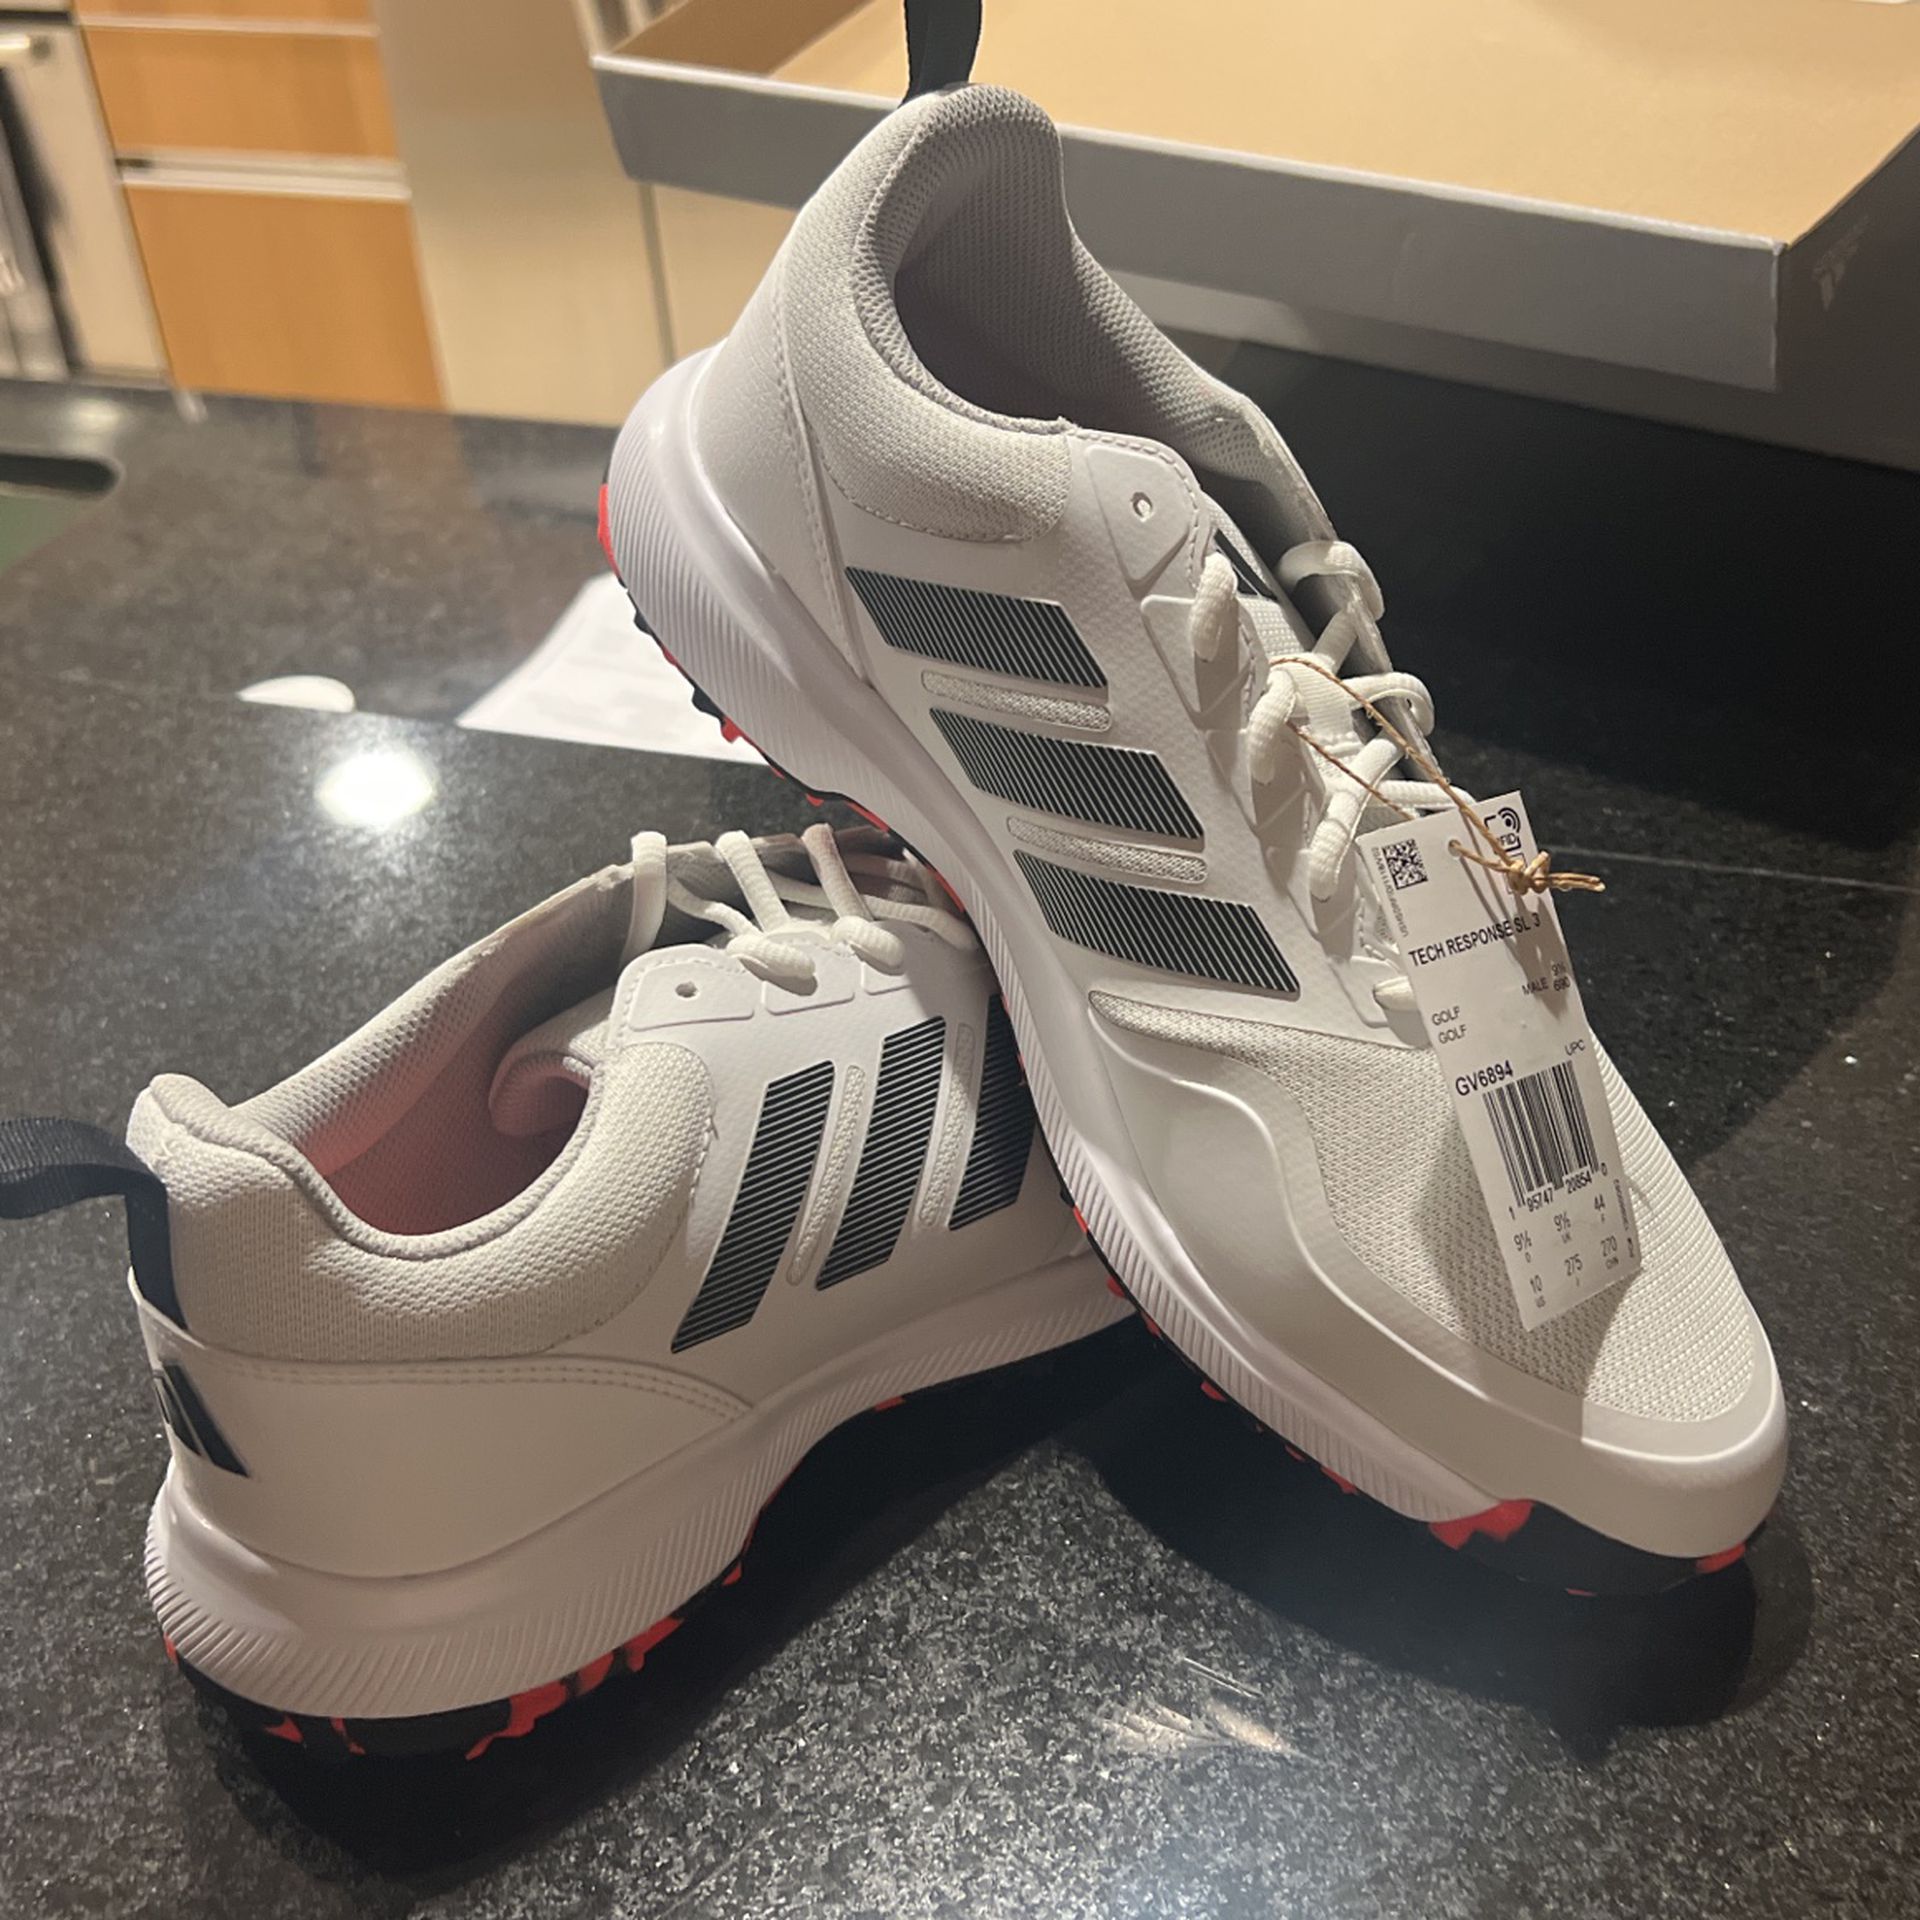 ADIDAS GOLF SHOES SIZE 10 